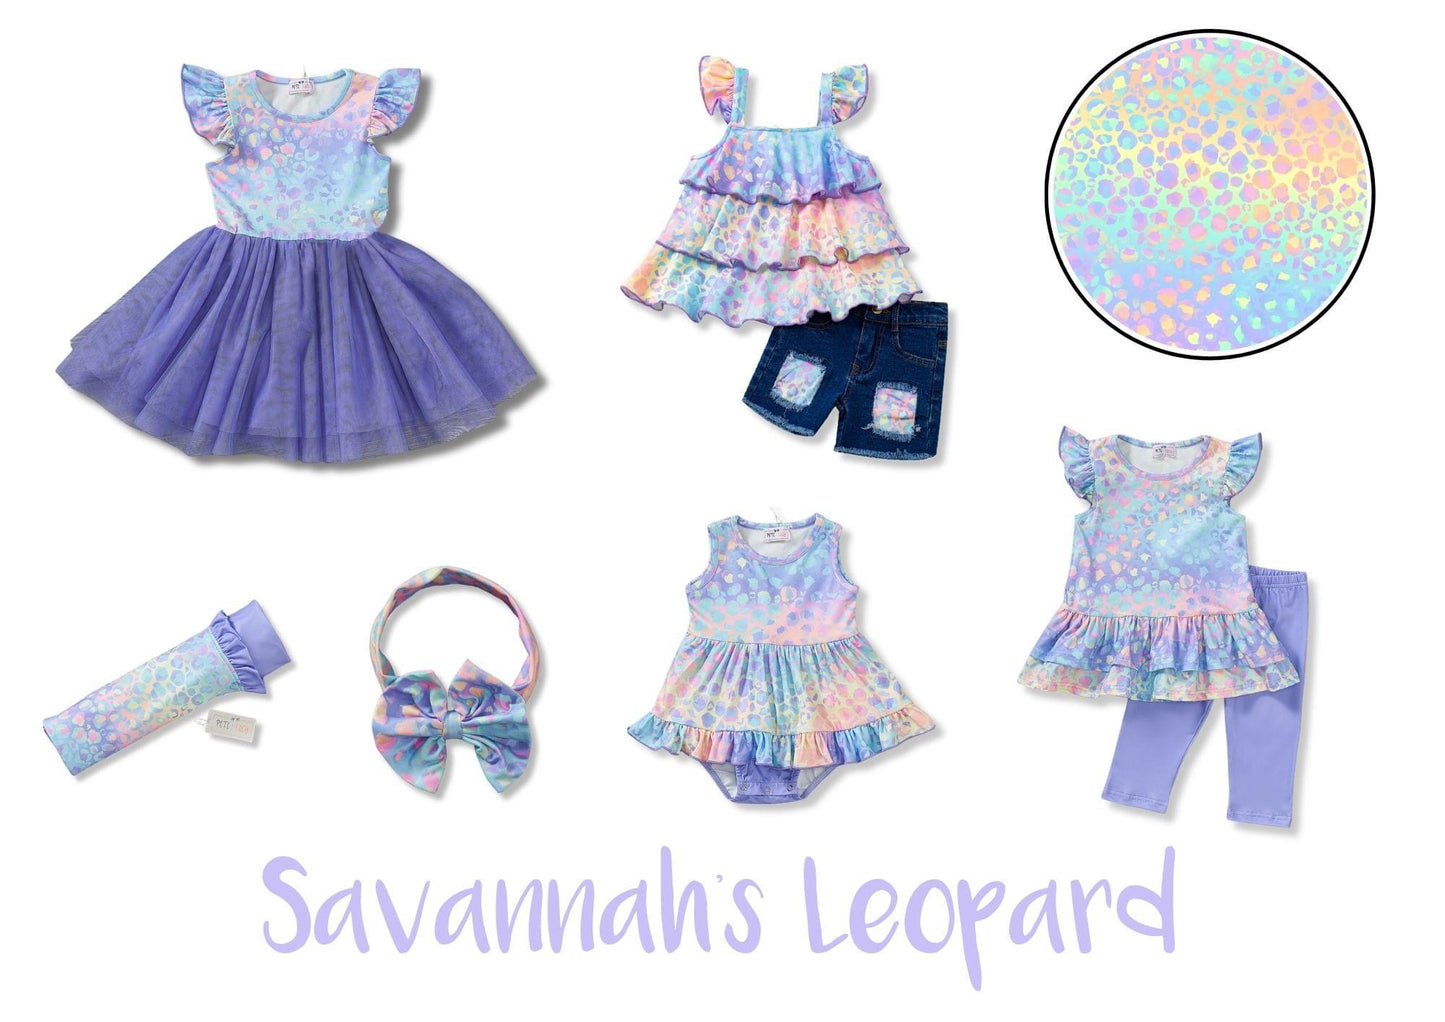 (Preorder) Savannah’s Leopard Infant Romper by Pete + Lucy